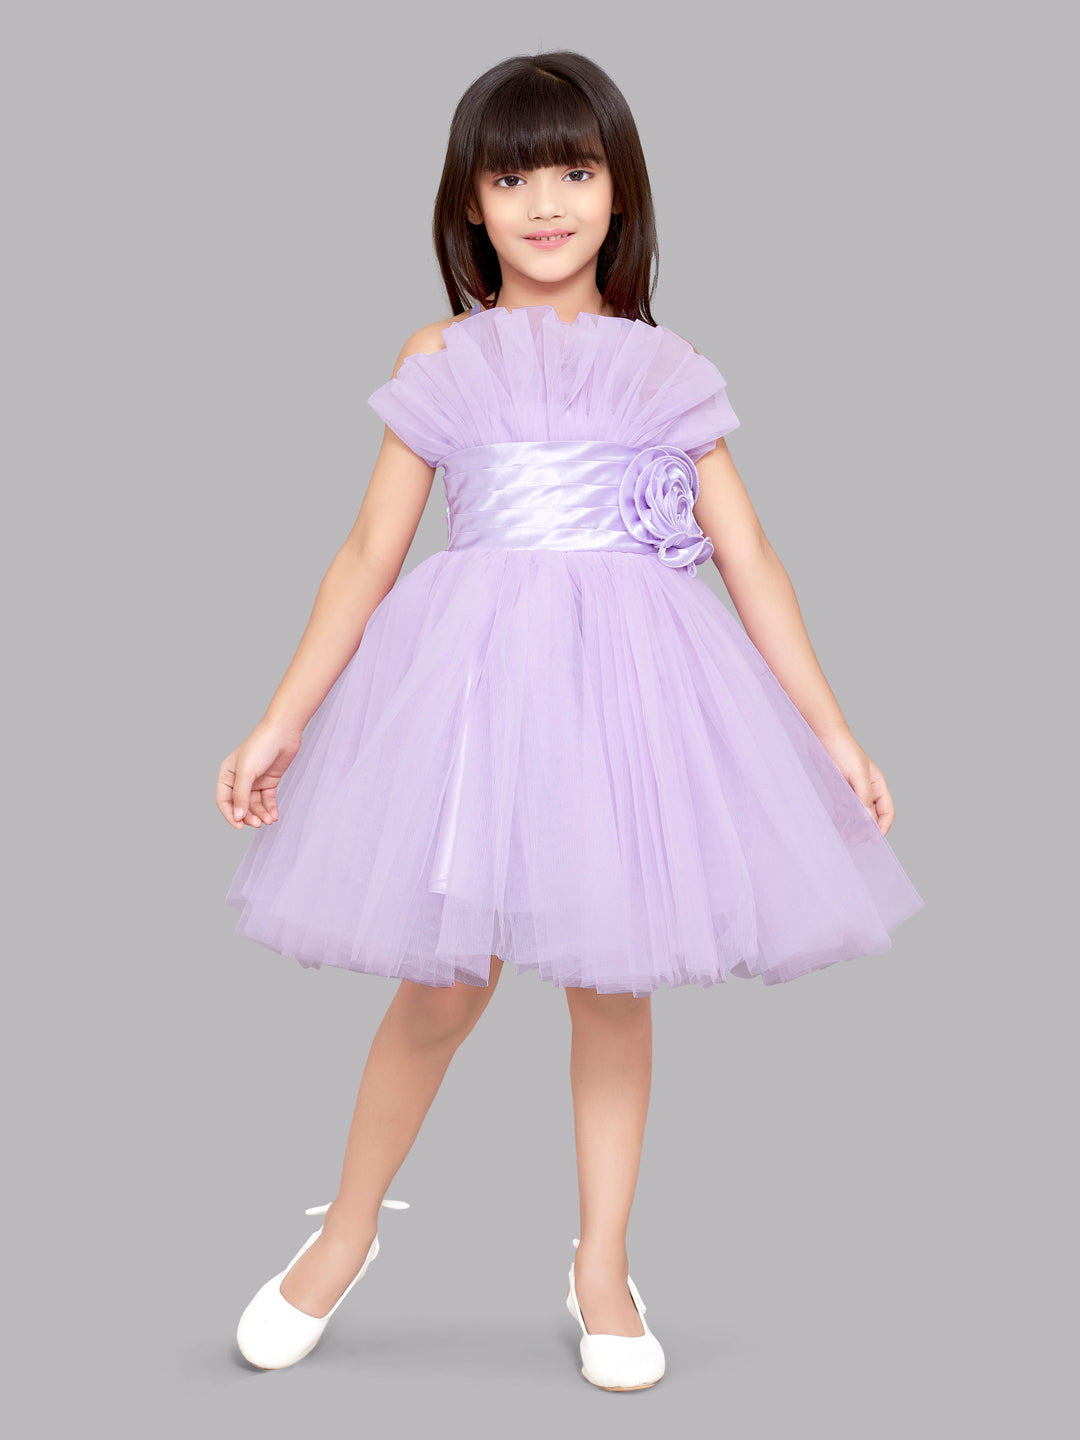 Si Rosa By Hopscotch Girls Midi/Knee Length Party Dress Price in India -  Buy Si Rosa By Hopscotch Girls Midi/Knee Length Party Dress online at  Flipkart.com